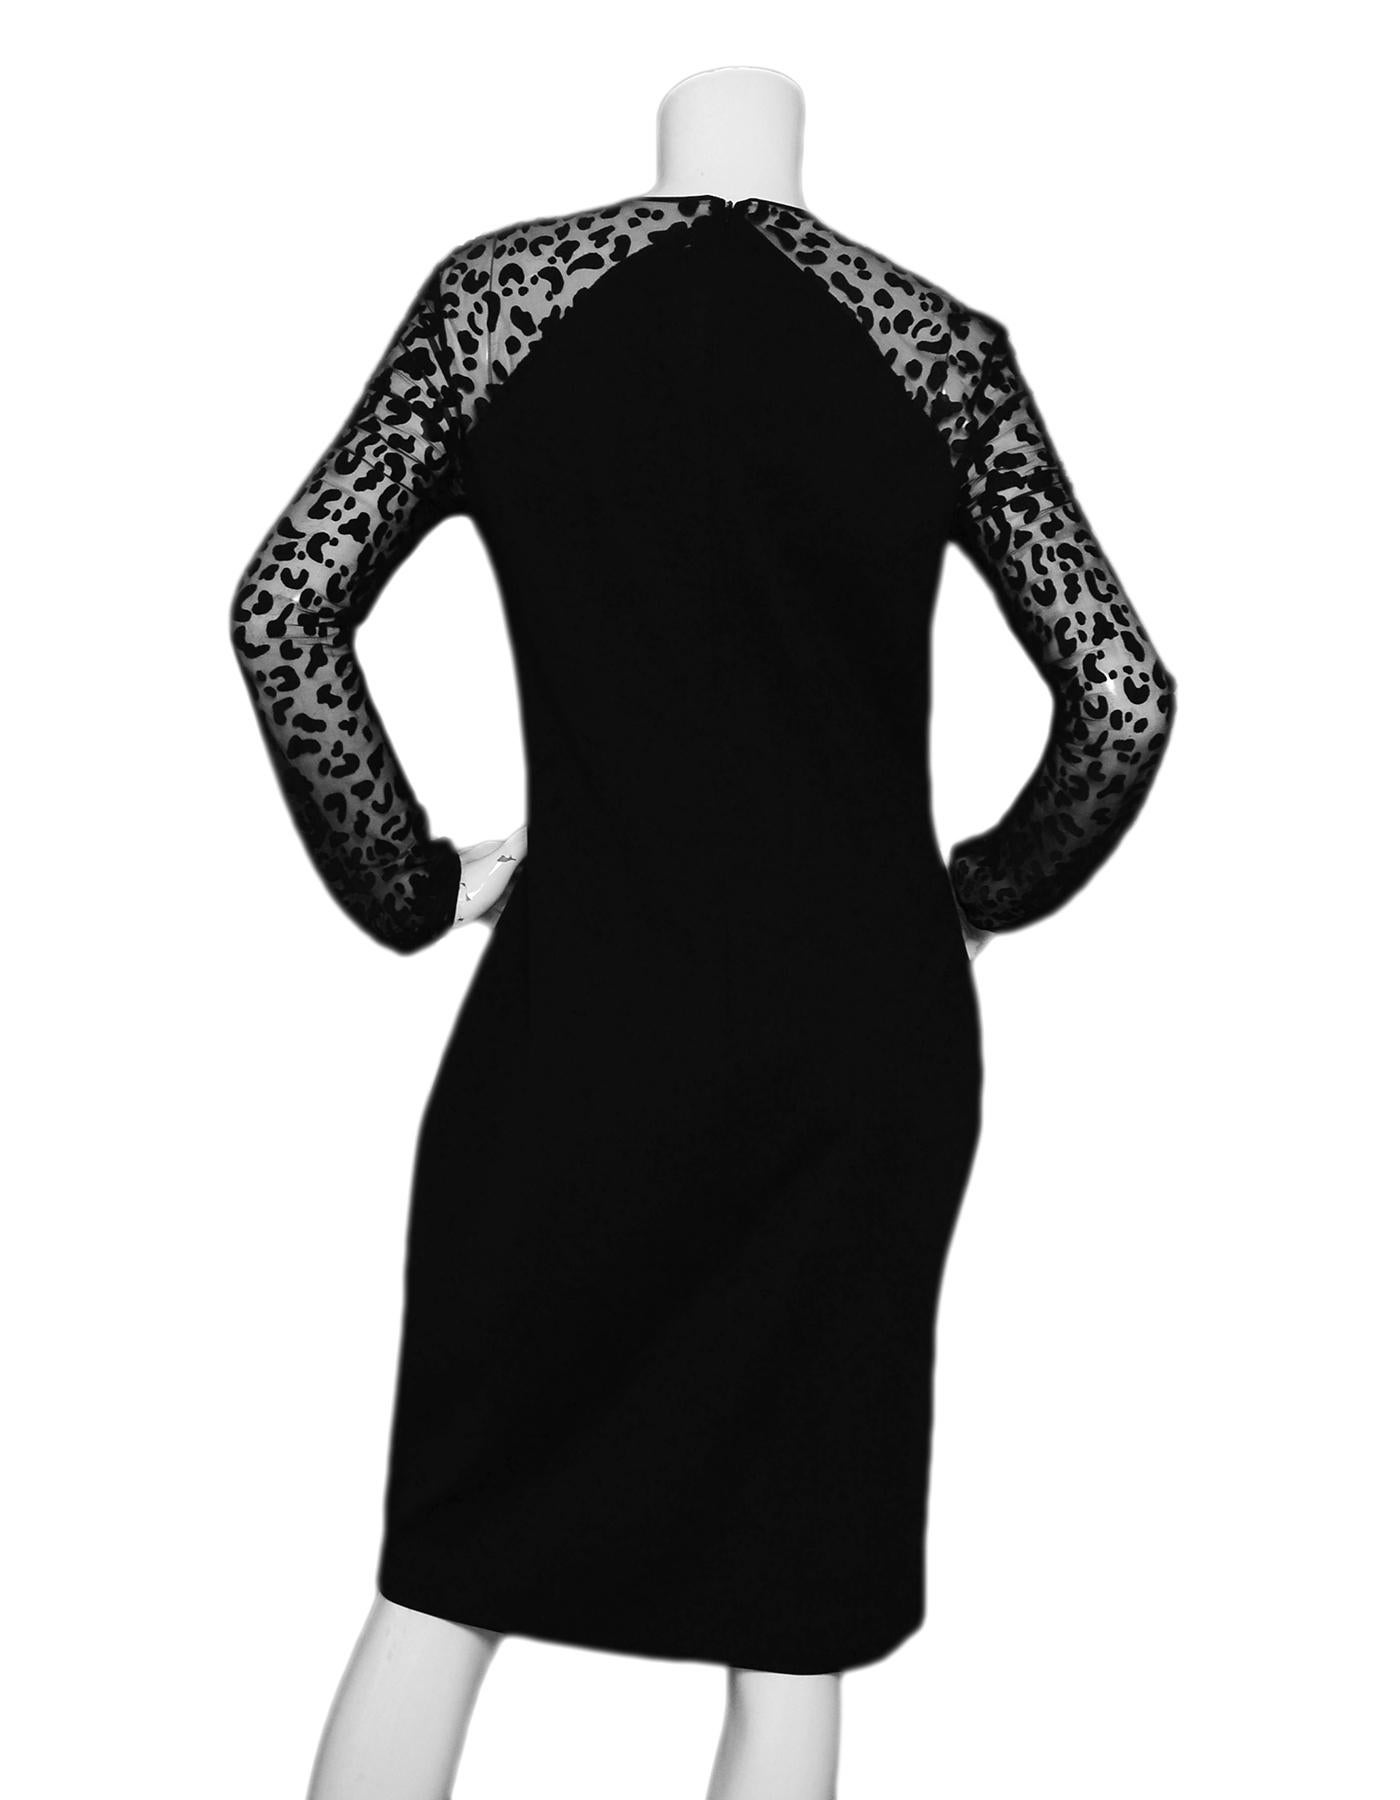 Stella McCartney Black Leopard Chiffon Sleeve Dress sz 48 In Excellent Condition In New York, NY